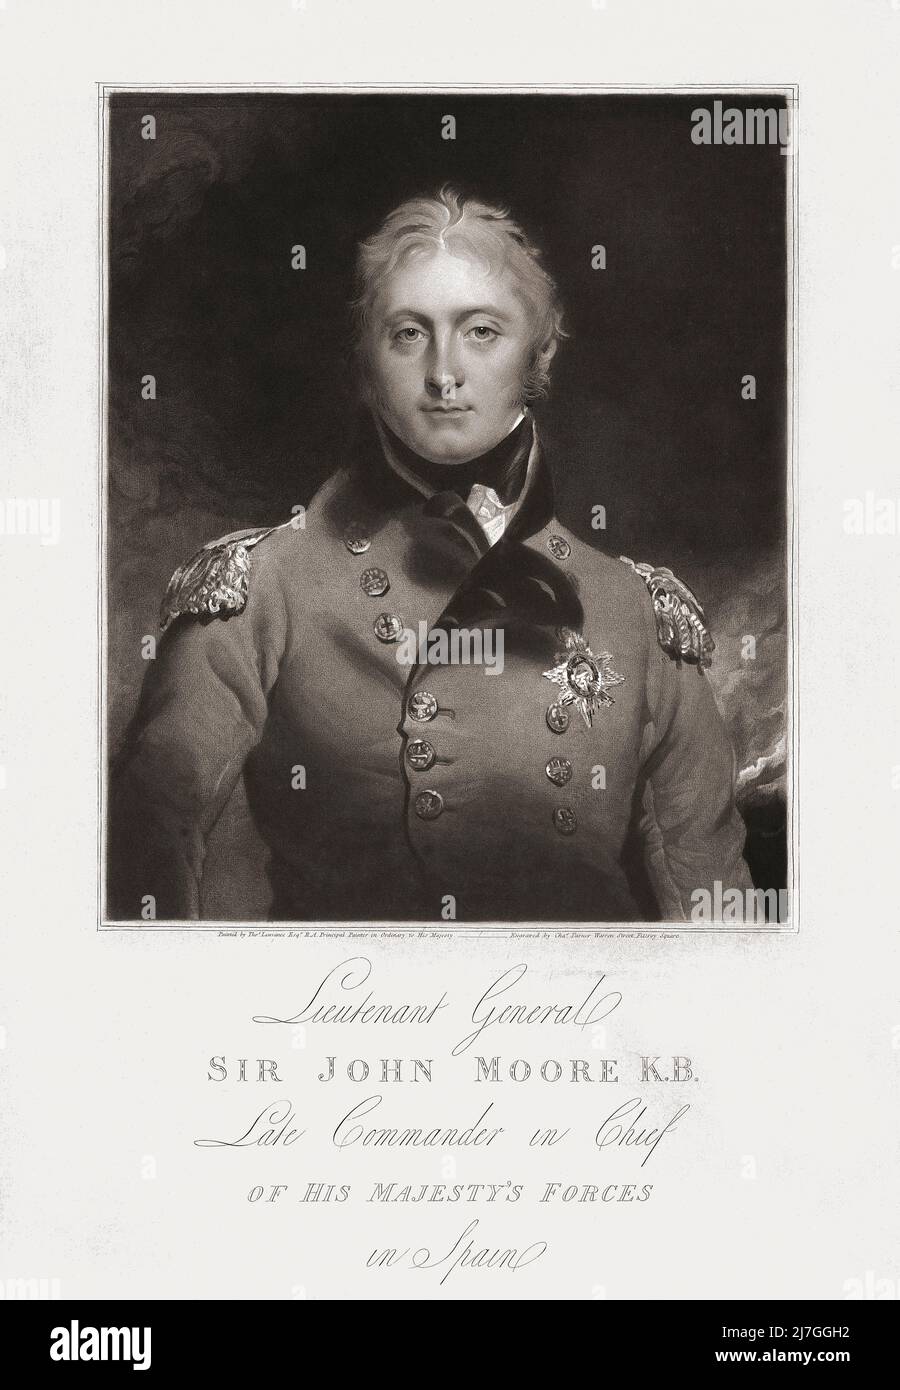 Lieutenant-General Sir John Moore, 1761 - 1809. Scottish born British Army soldier who was killed at the Battle of Corunna during the Peninsula War.  Engraved by Charles Turner after the painting by Sir Thomas Lawrence. Stock Photo